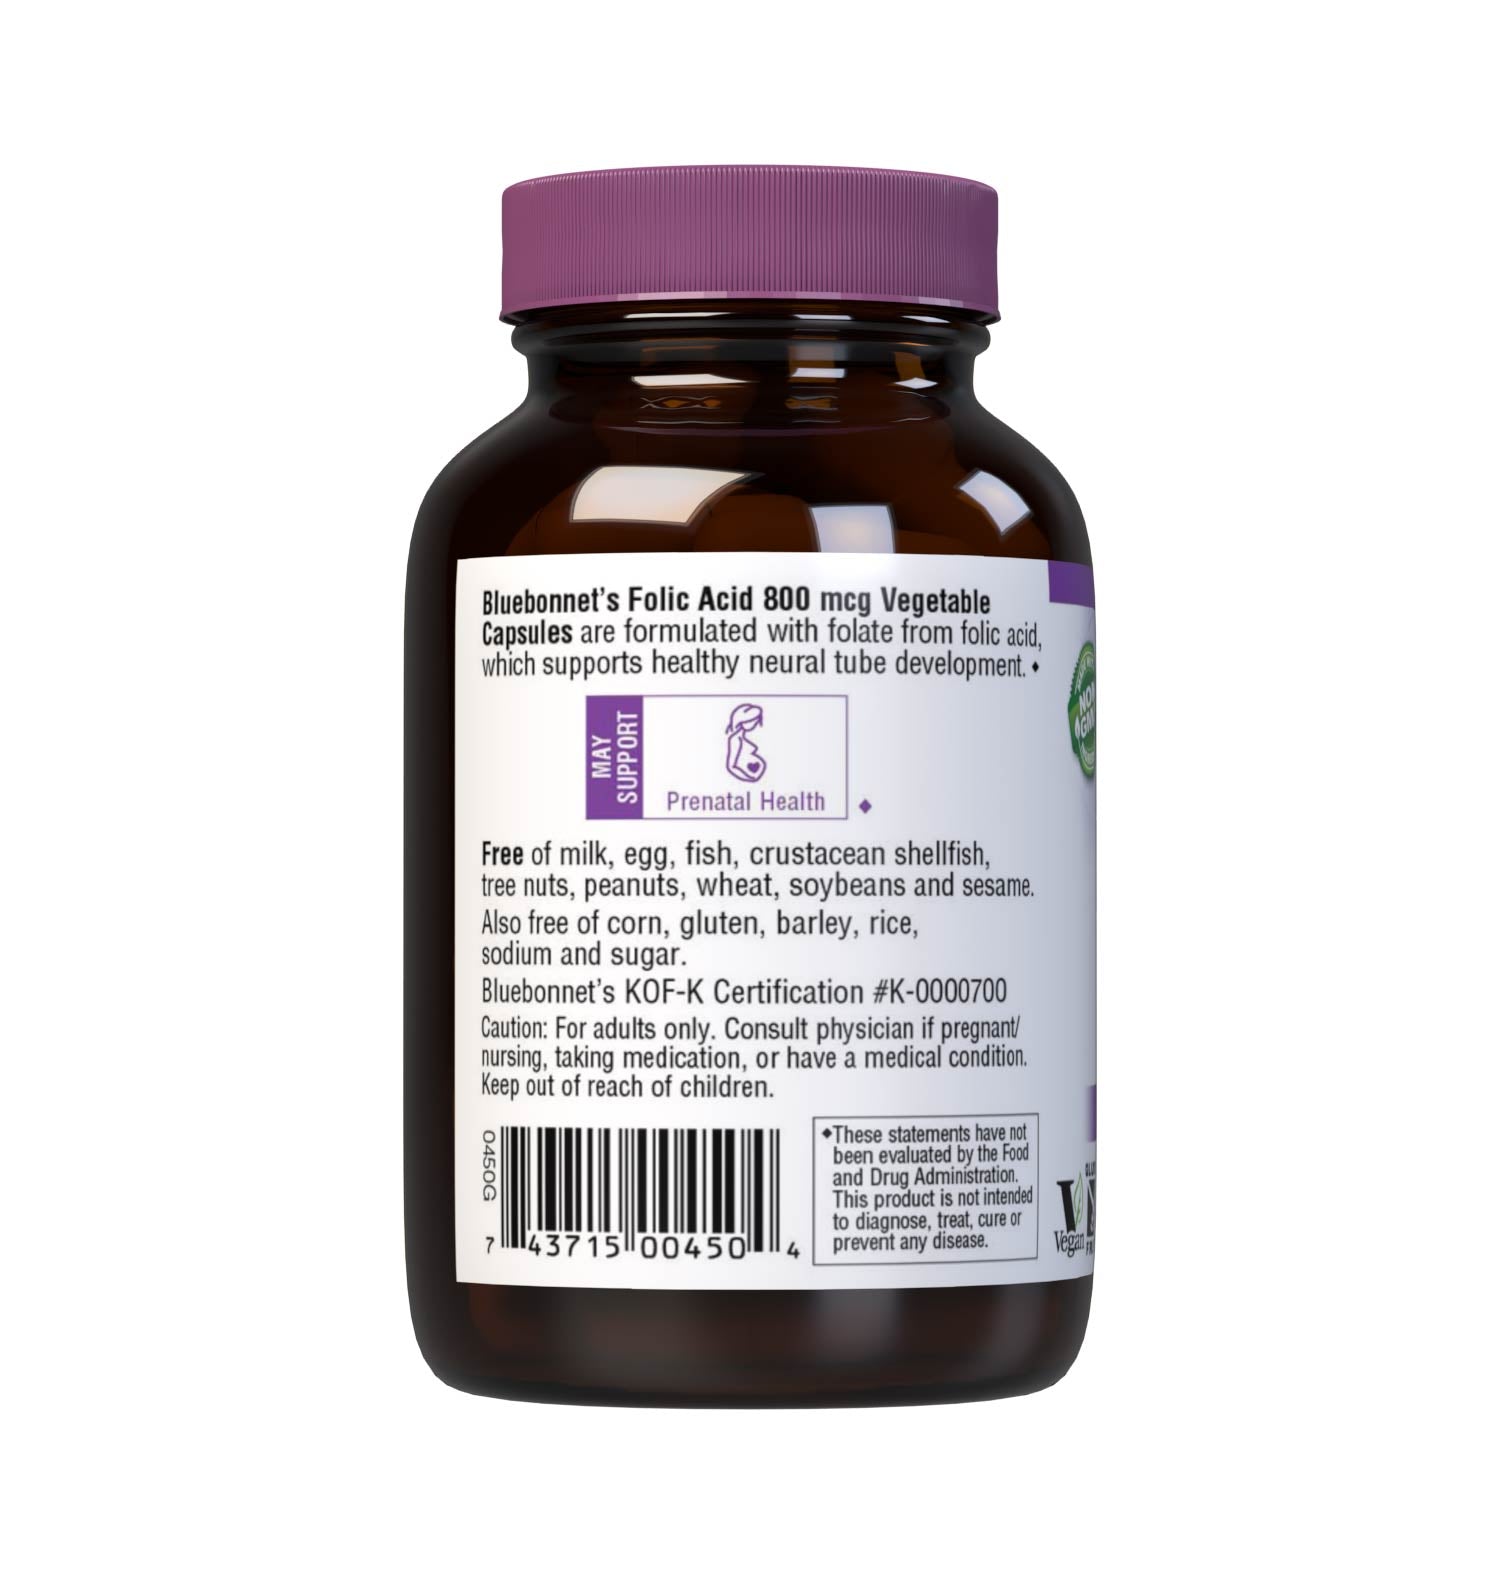 Bluebonnet’s Folic Acid 800 mcg Vegetable Capsules are formulated with folate in its crystalline form which may help support neural tube development. Description panel. #size_90 count